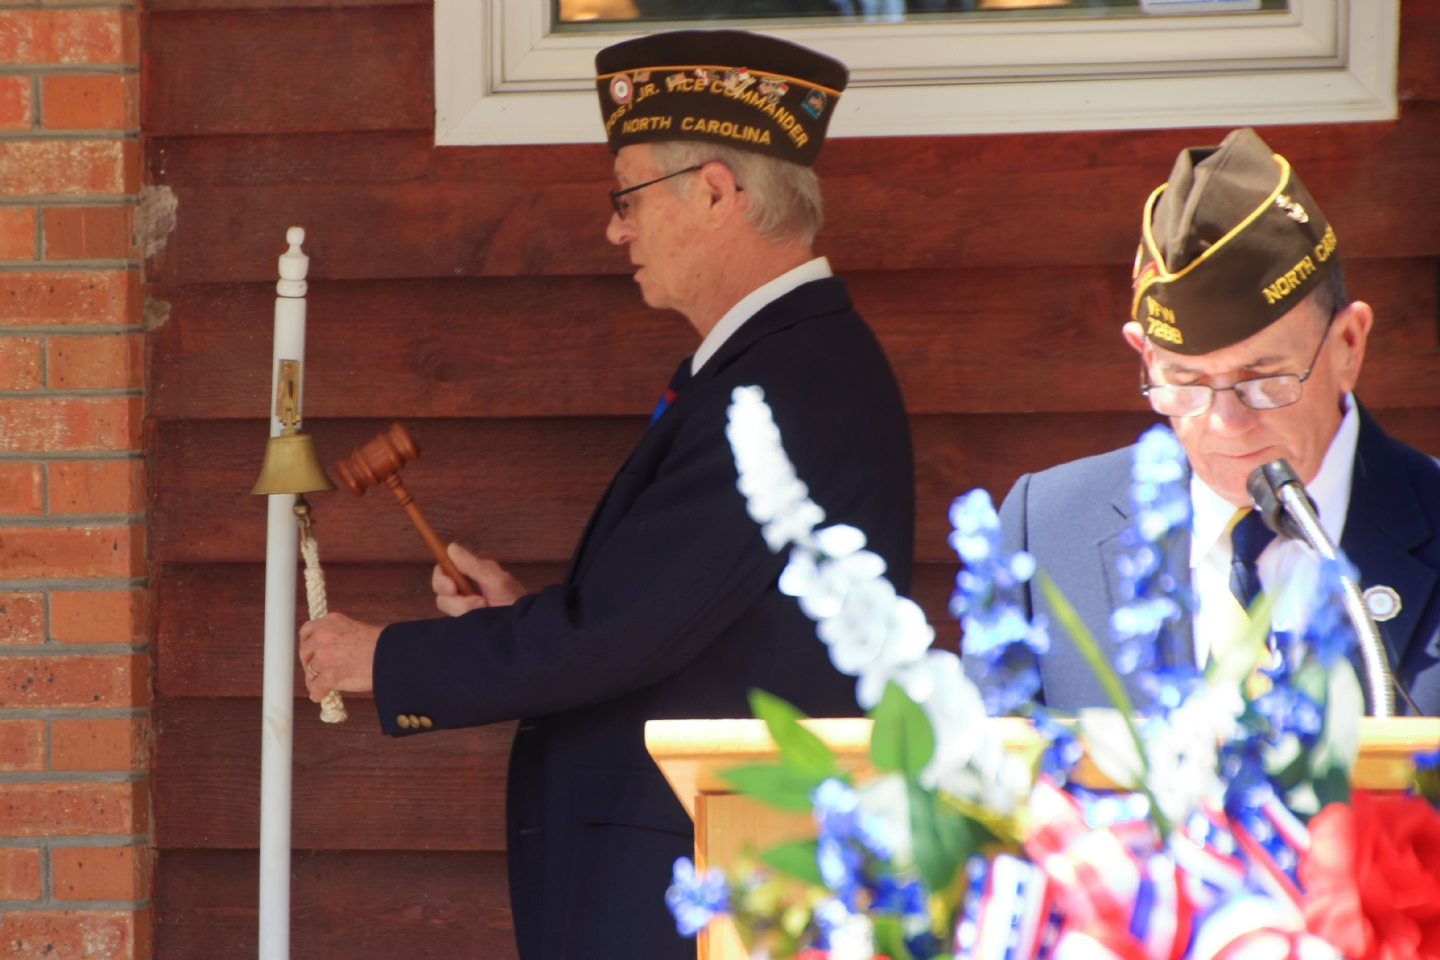 Calabash VFW Post 7288 Chaplain George Bissett tolls the bell in memory of members who passed in 2021 as commander Jim Milstead reads the roll.